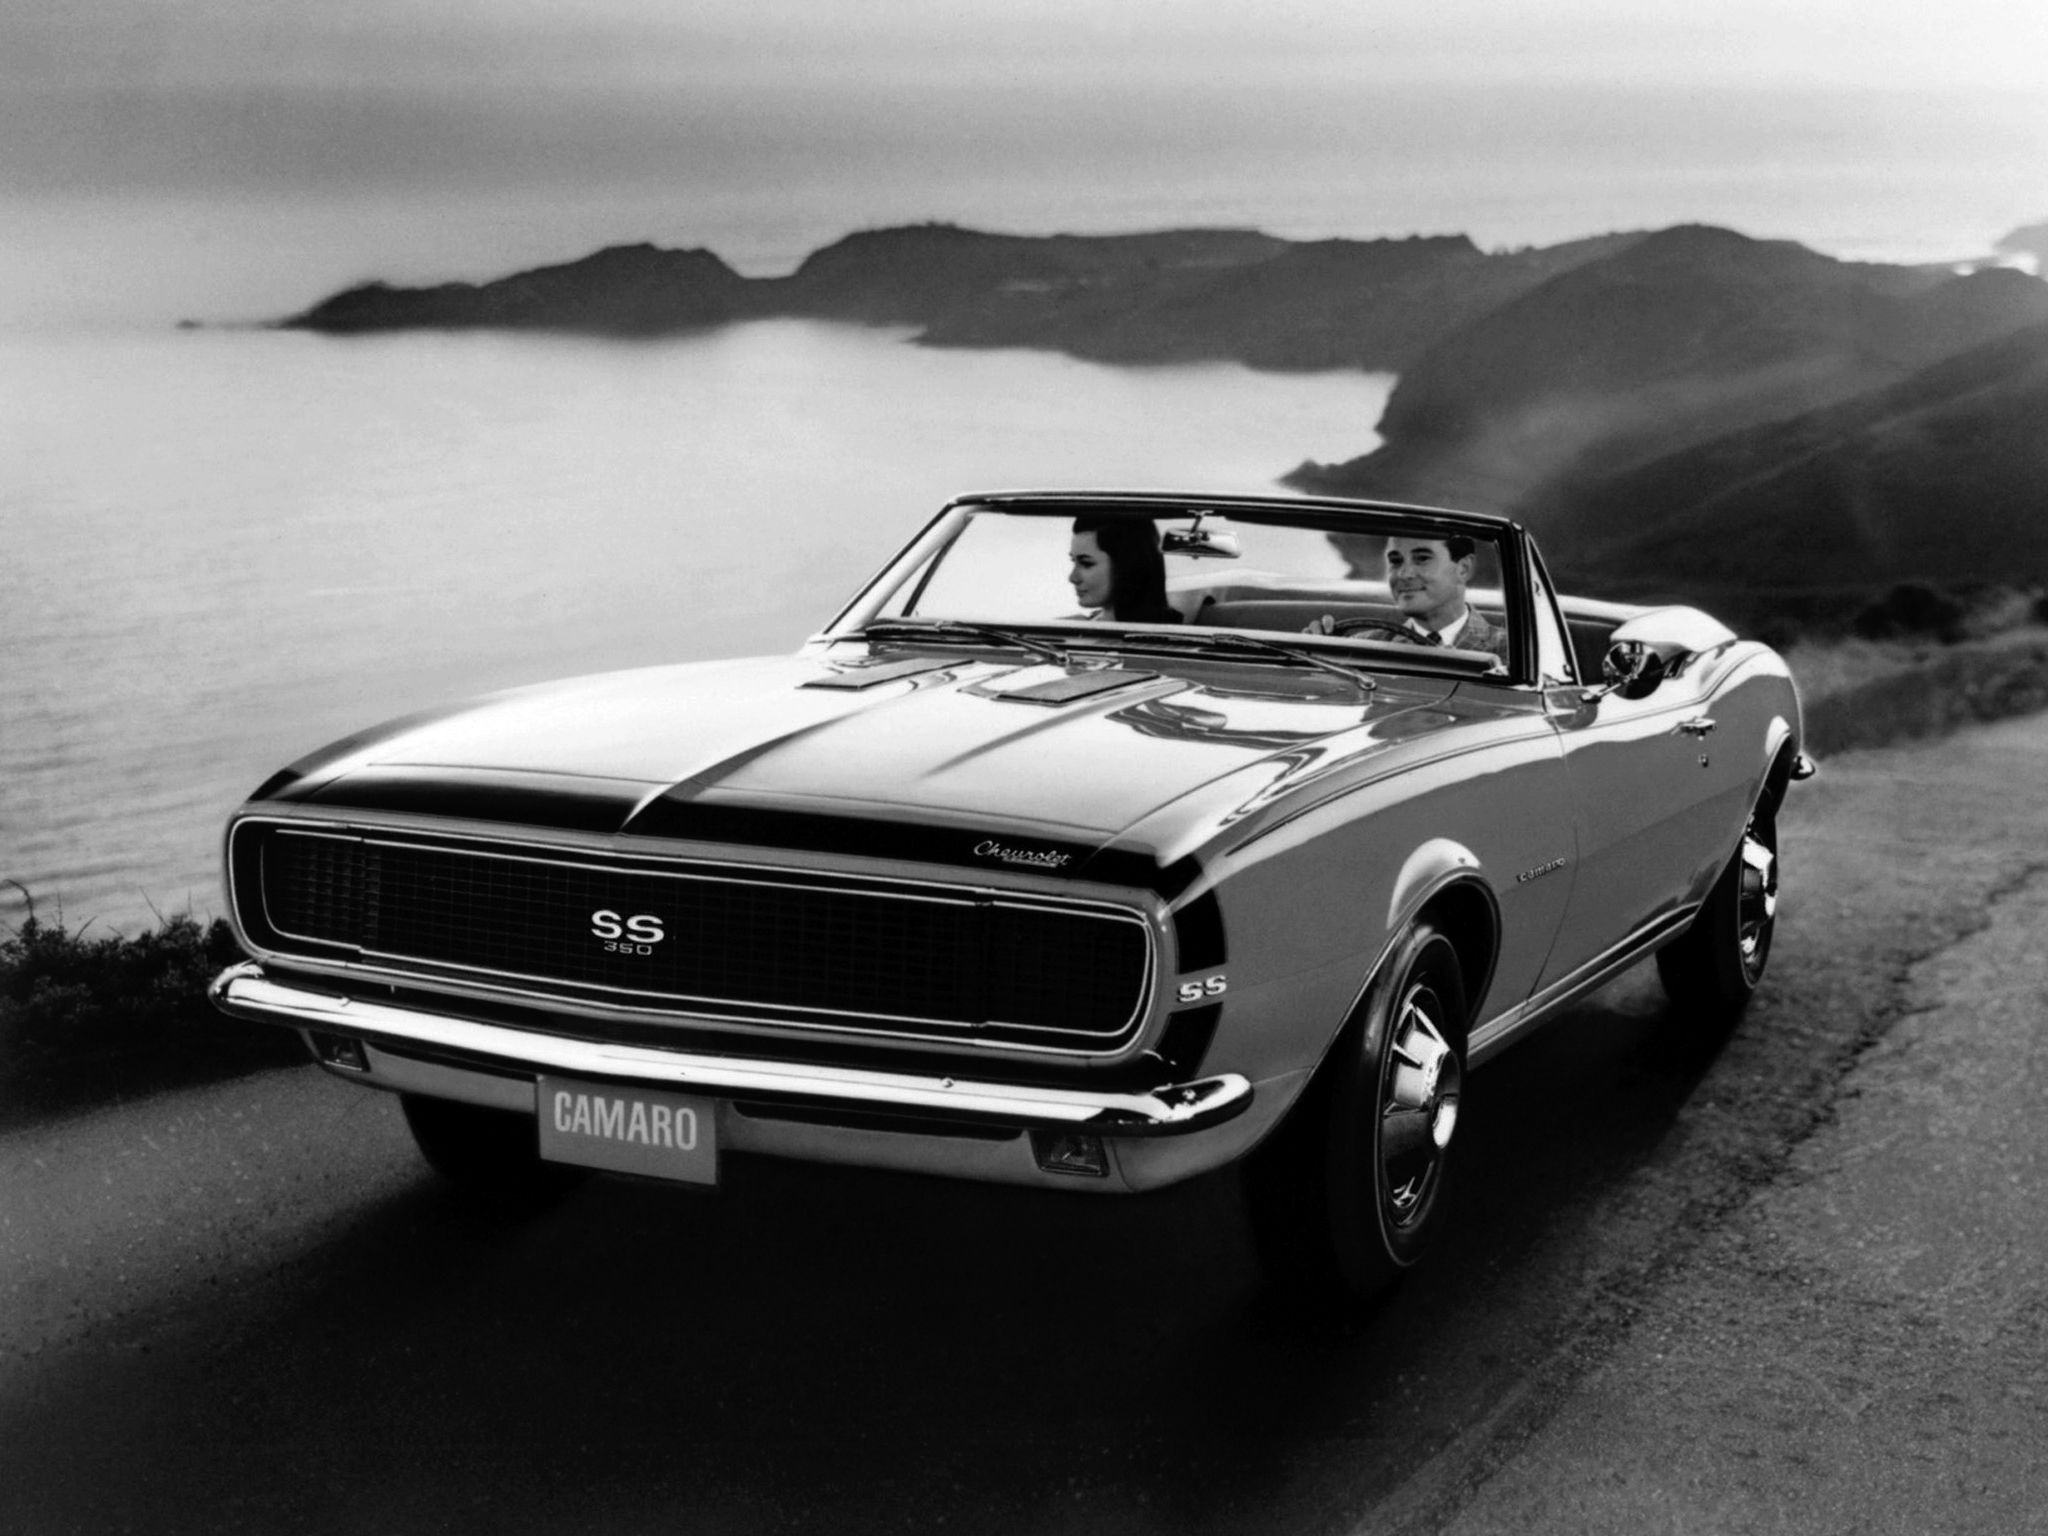 Chevrolet, Camaro, R s, S s, Convertible, Muscle, Classic Wallpaper HD / Desktop and Mobile Background